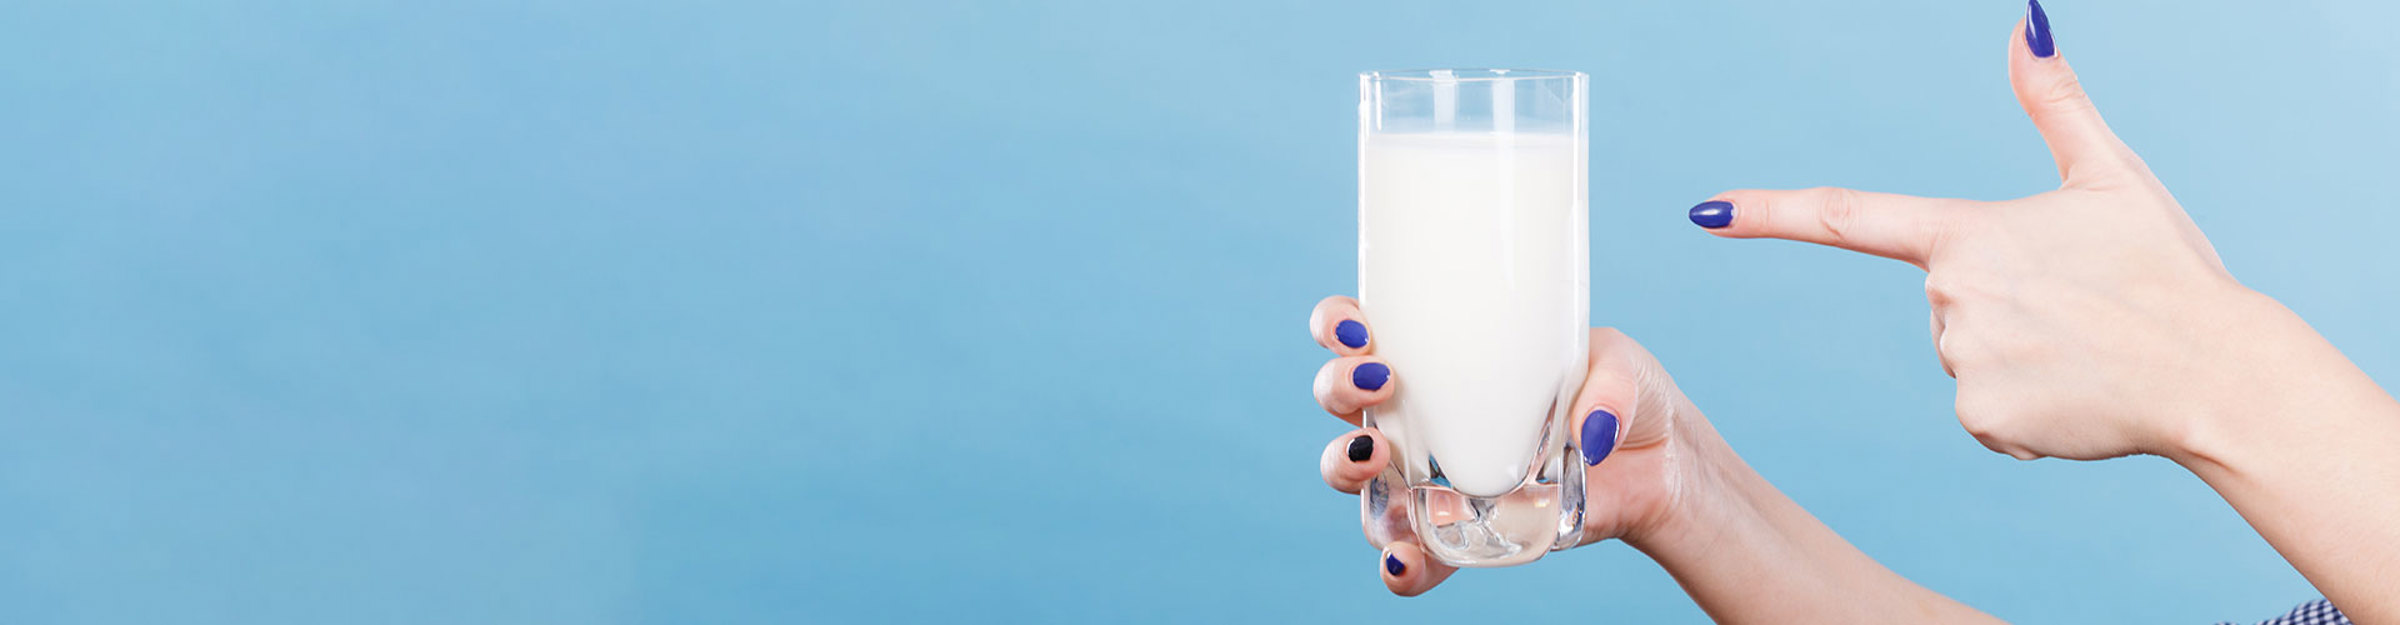 A pair of hands with purple painted nails with one hand pointing towards a glass of milk held in the other